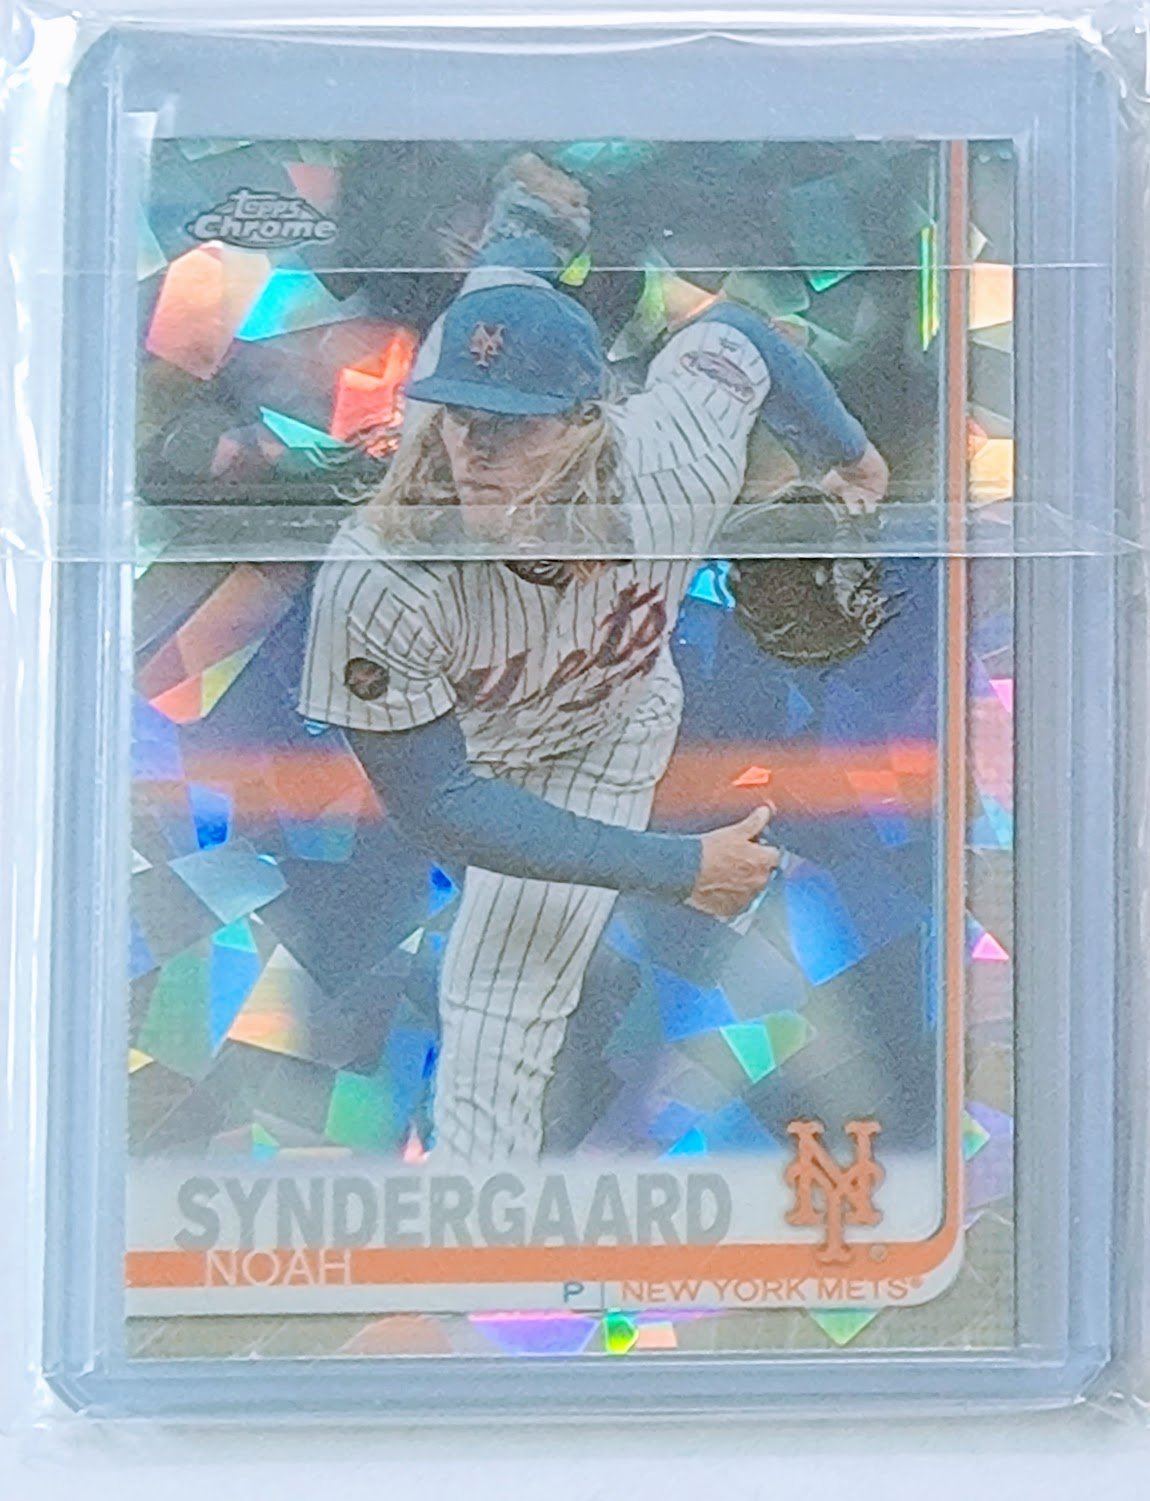 2019 Topps Chrome Sapphire Noah Syndergaard Baseball Card TPTV simple Xclusive Collectibles   